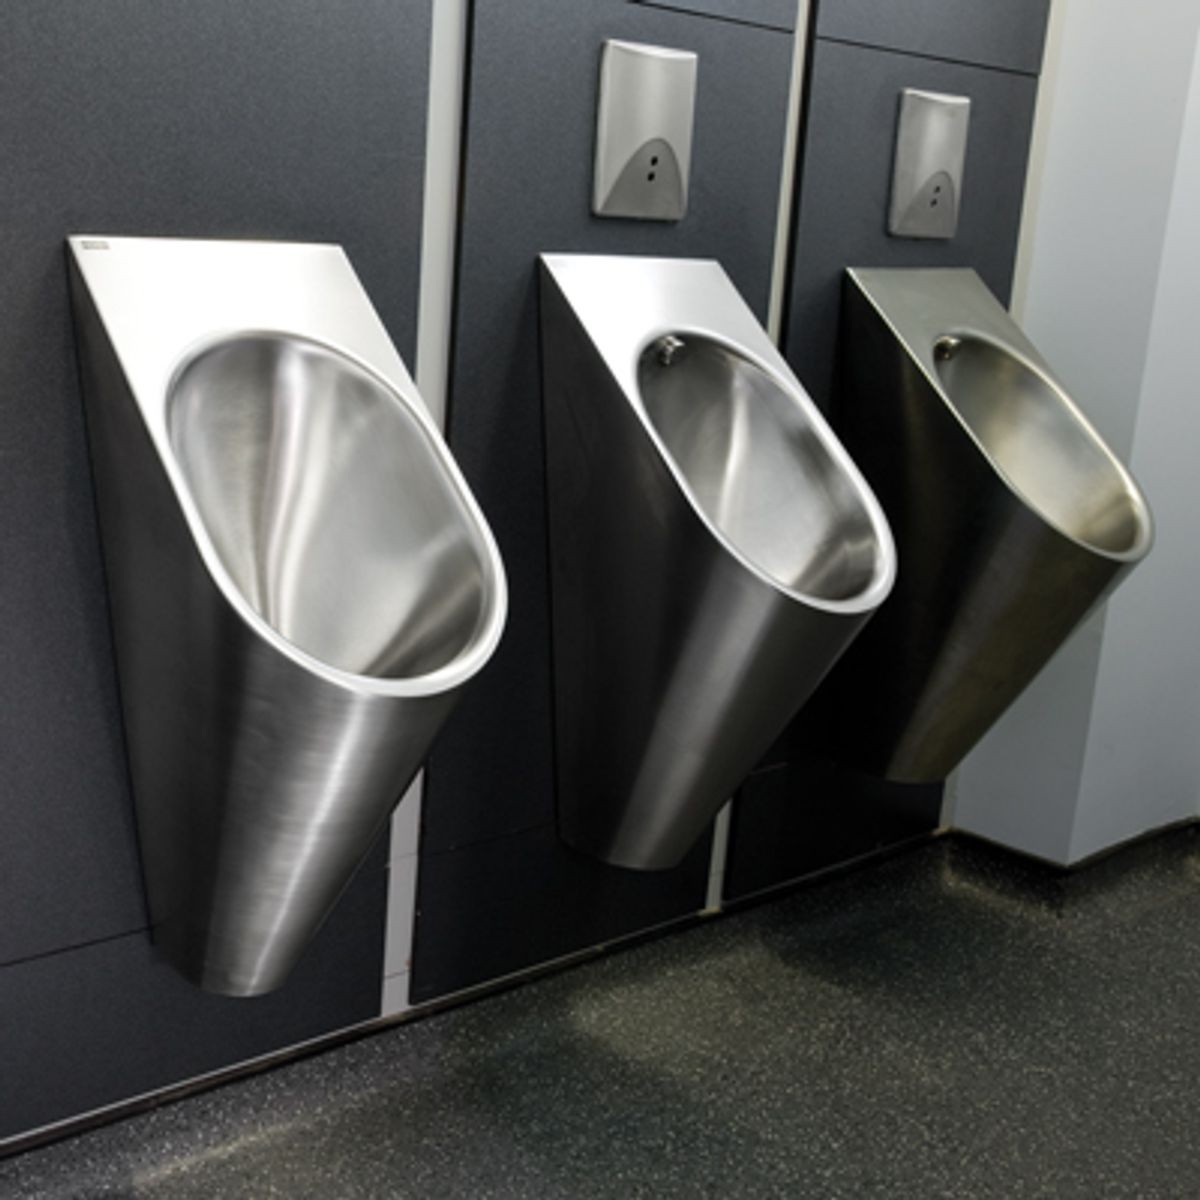 Bk Resources Stainless Steel 48 Urinal with Wall Mount Design